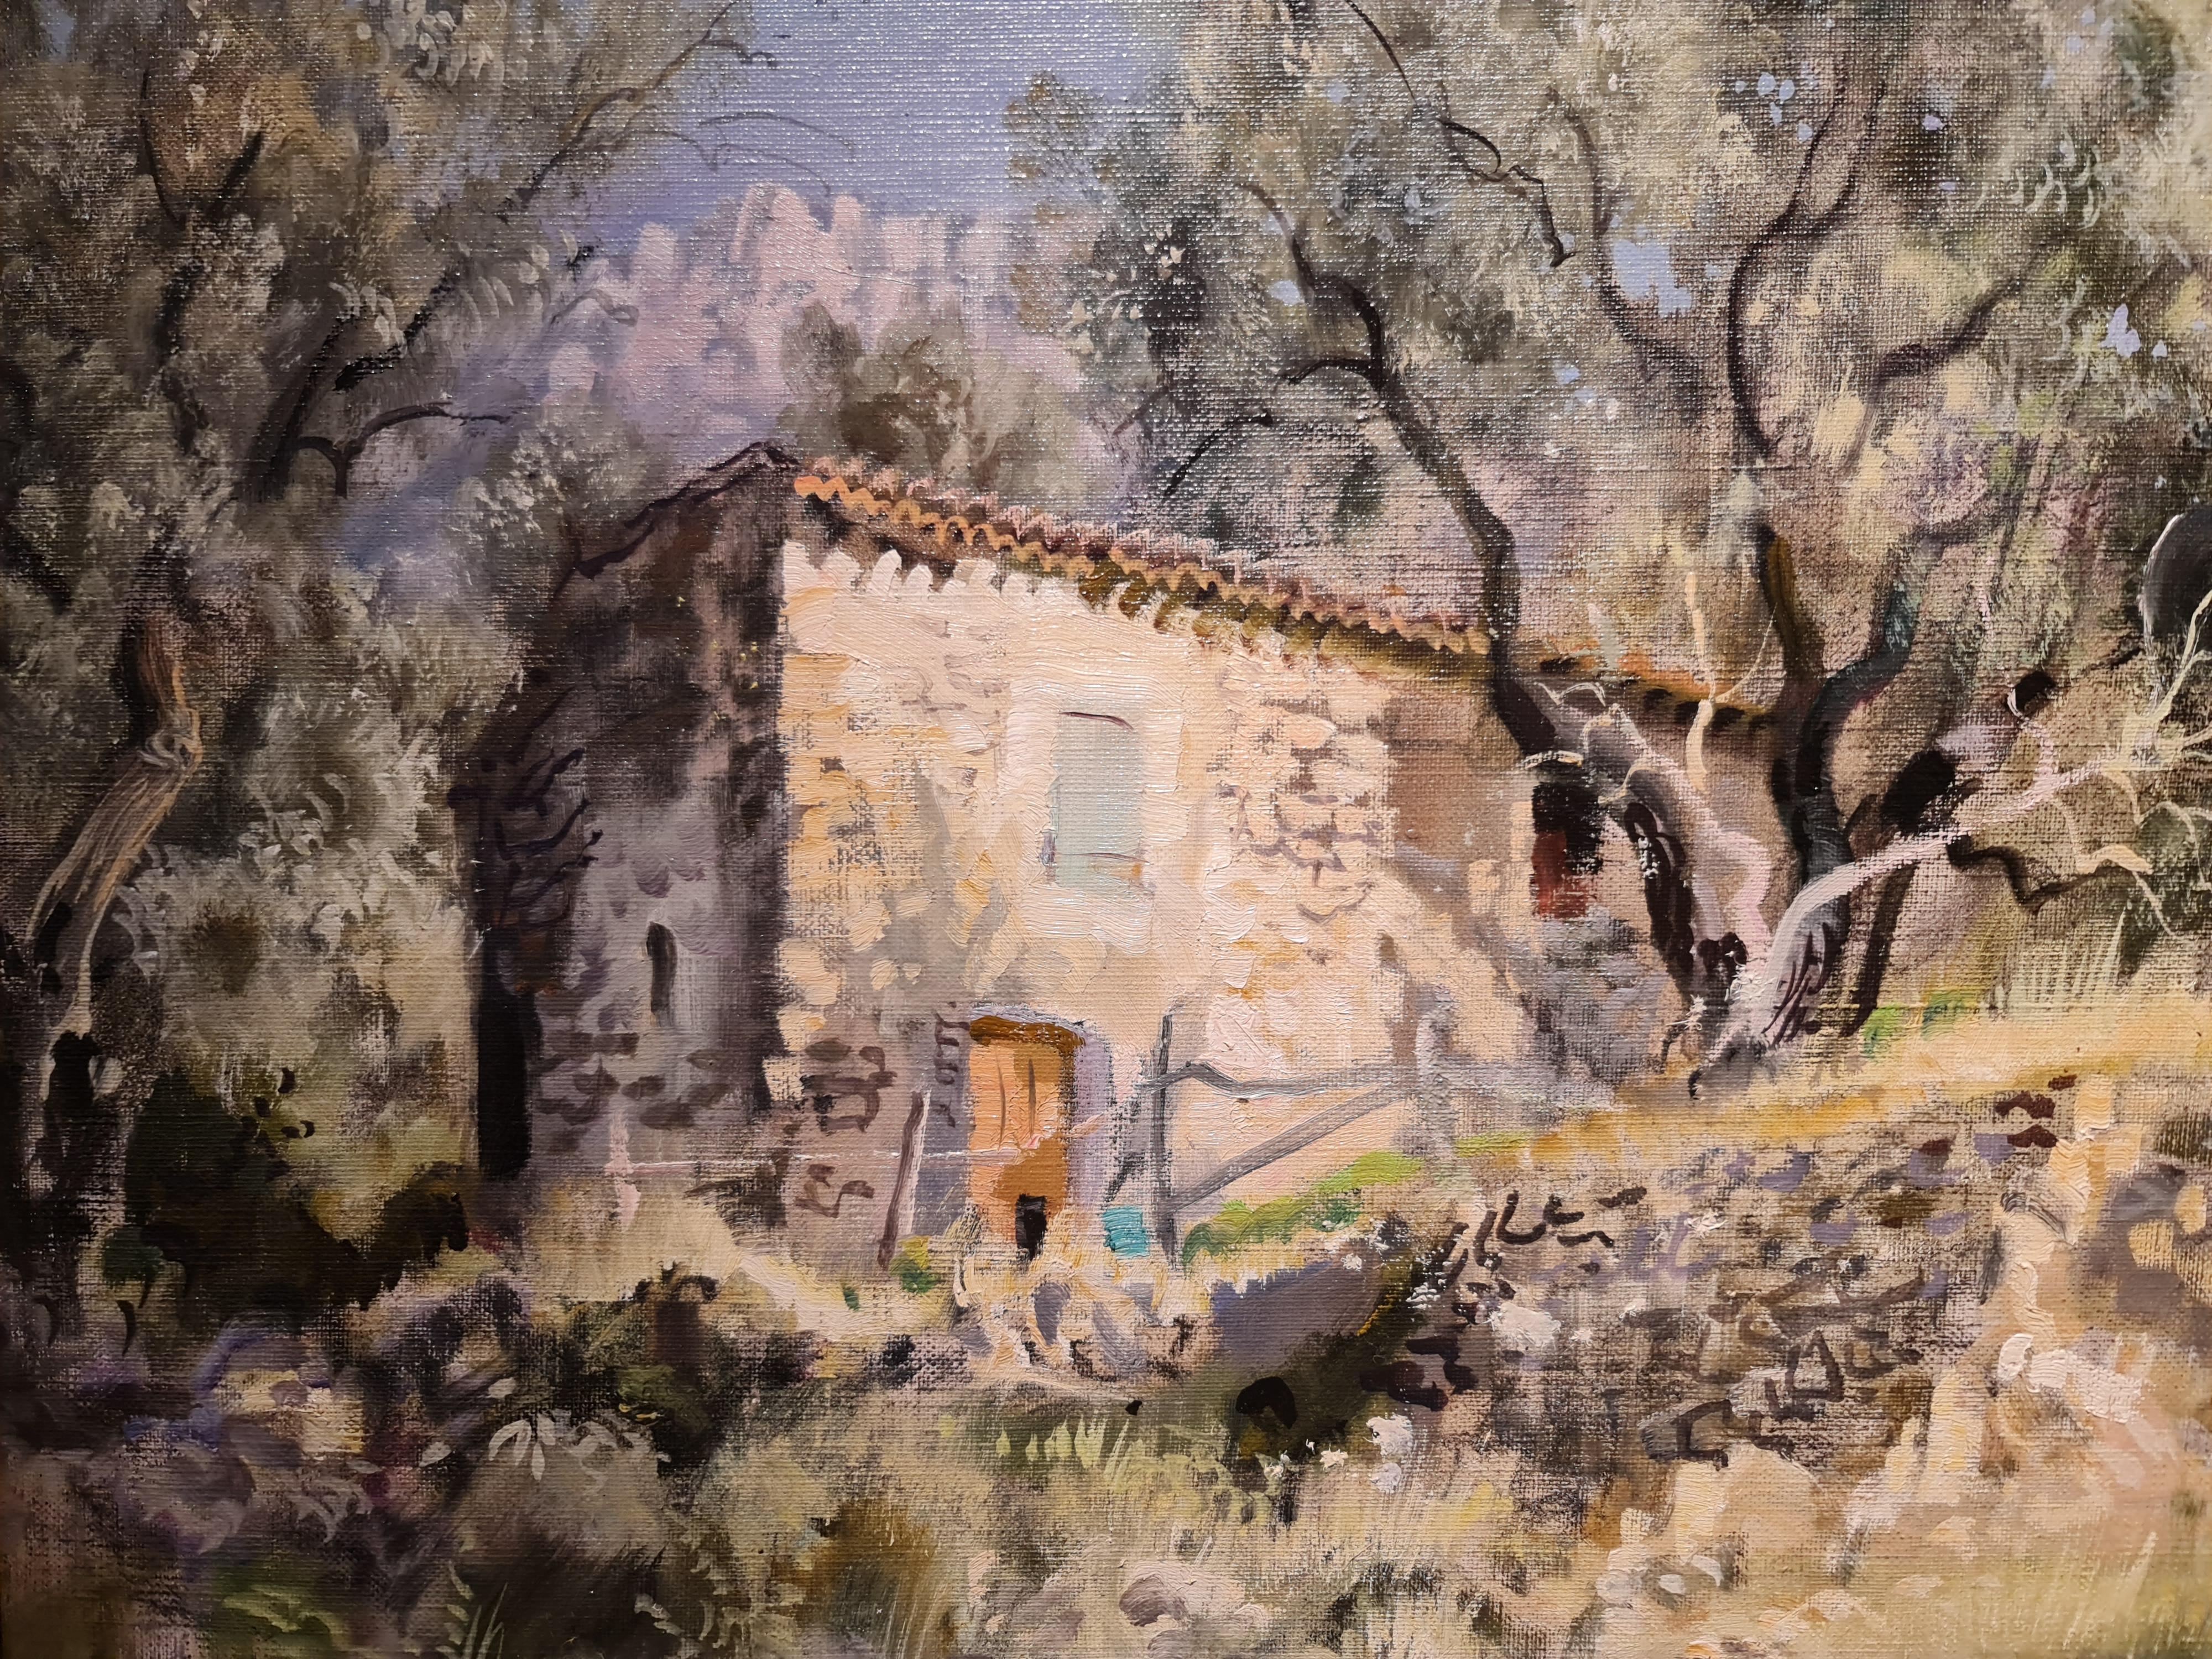 Castellar, Alpes-Maritimes
by Gabriel Deschamps
French 1919 - 2011

Oil on canvas
Canvas size: 18 x 24 inches
Framed size: 26 x 32 inches

Signed lower right